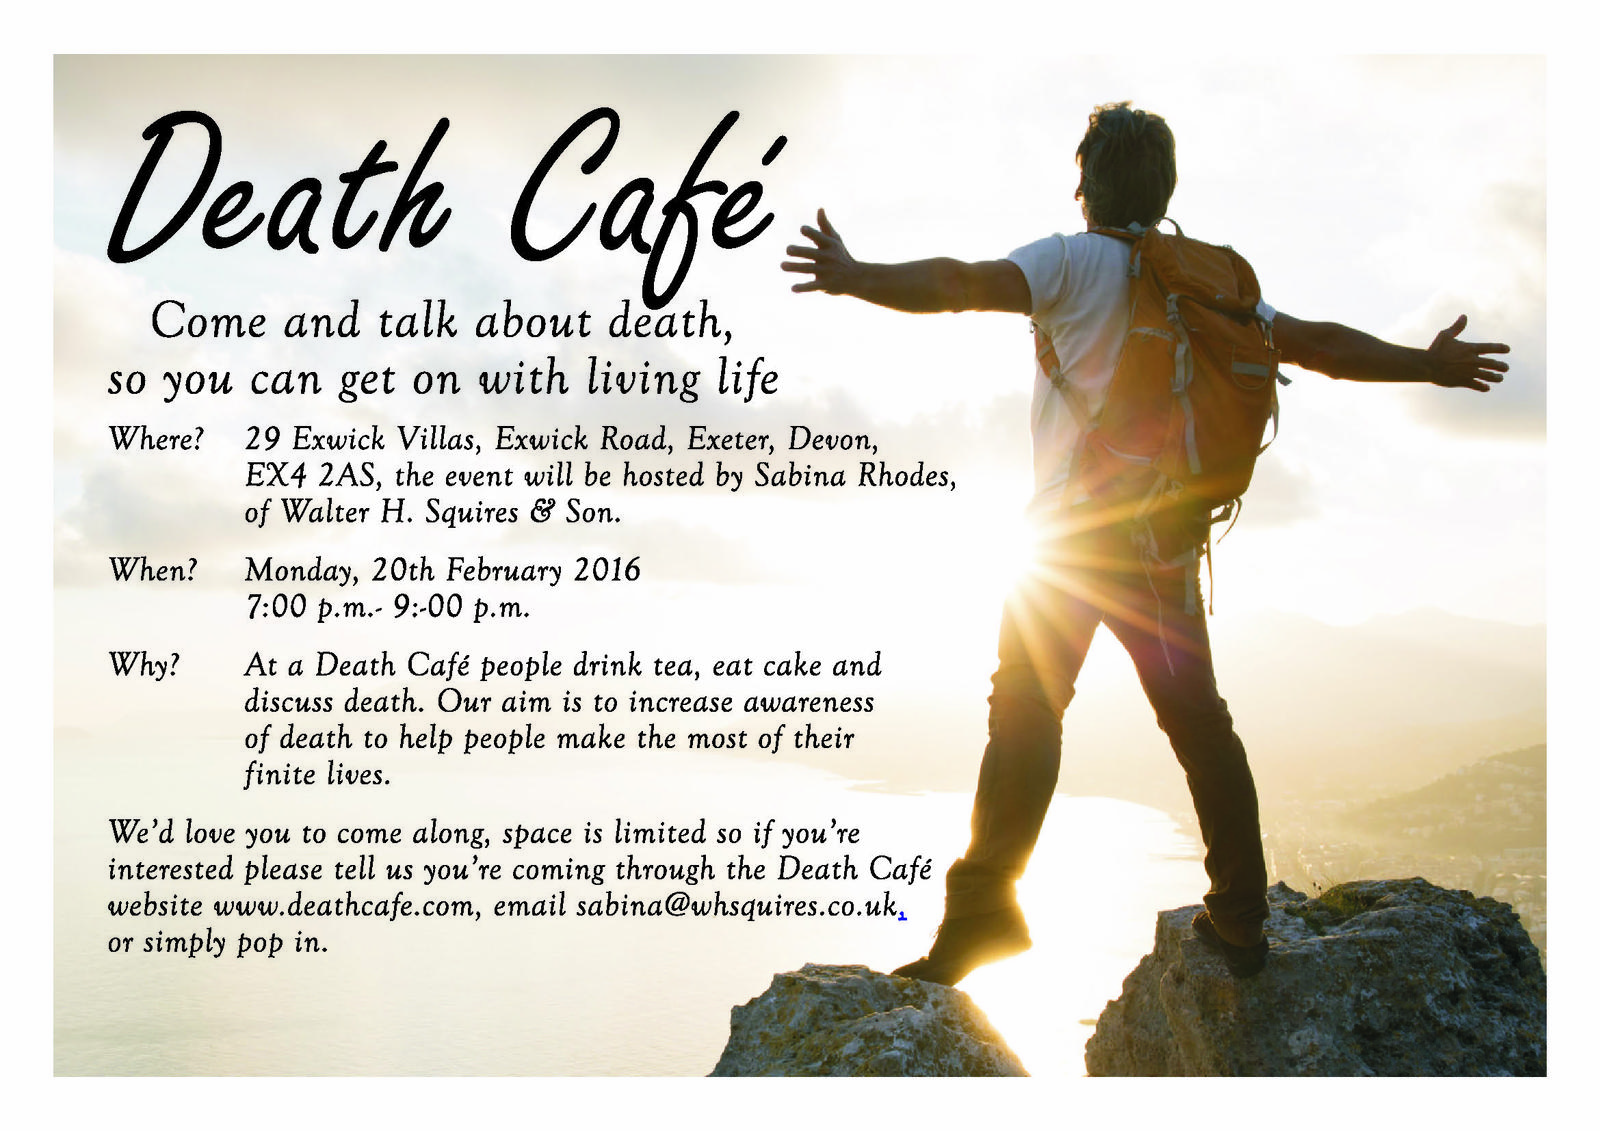 Exeter Death Cafe (Exwick)